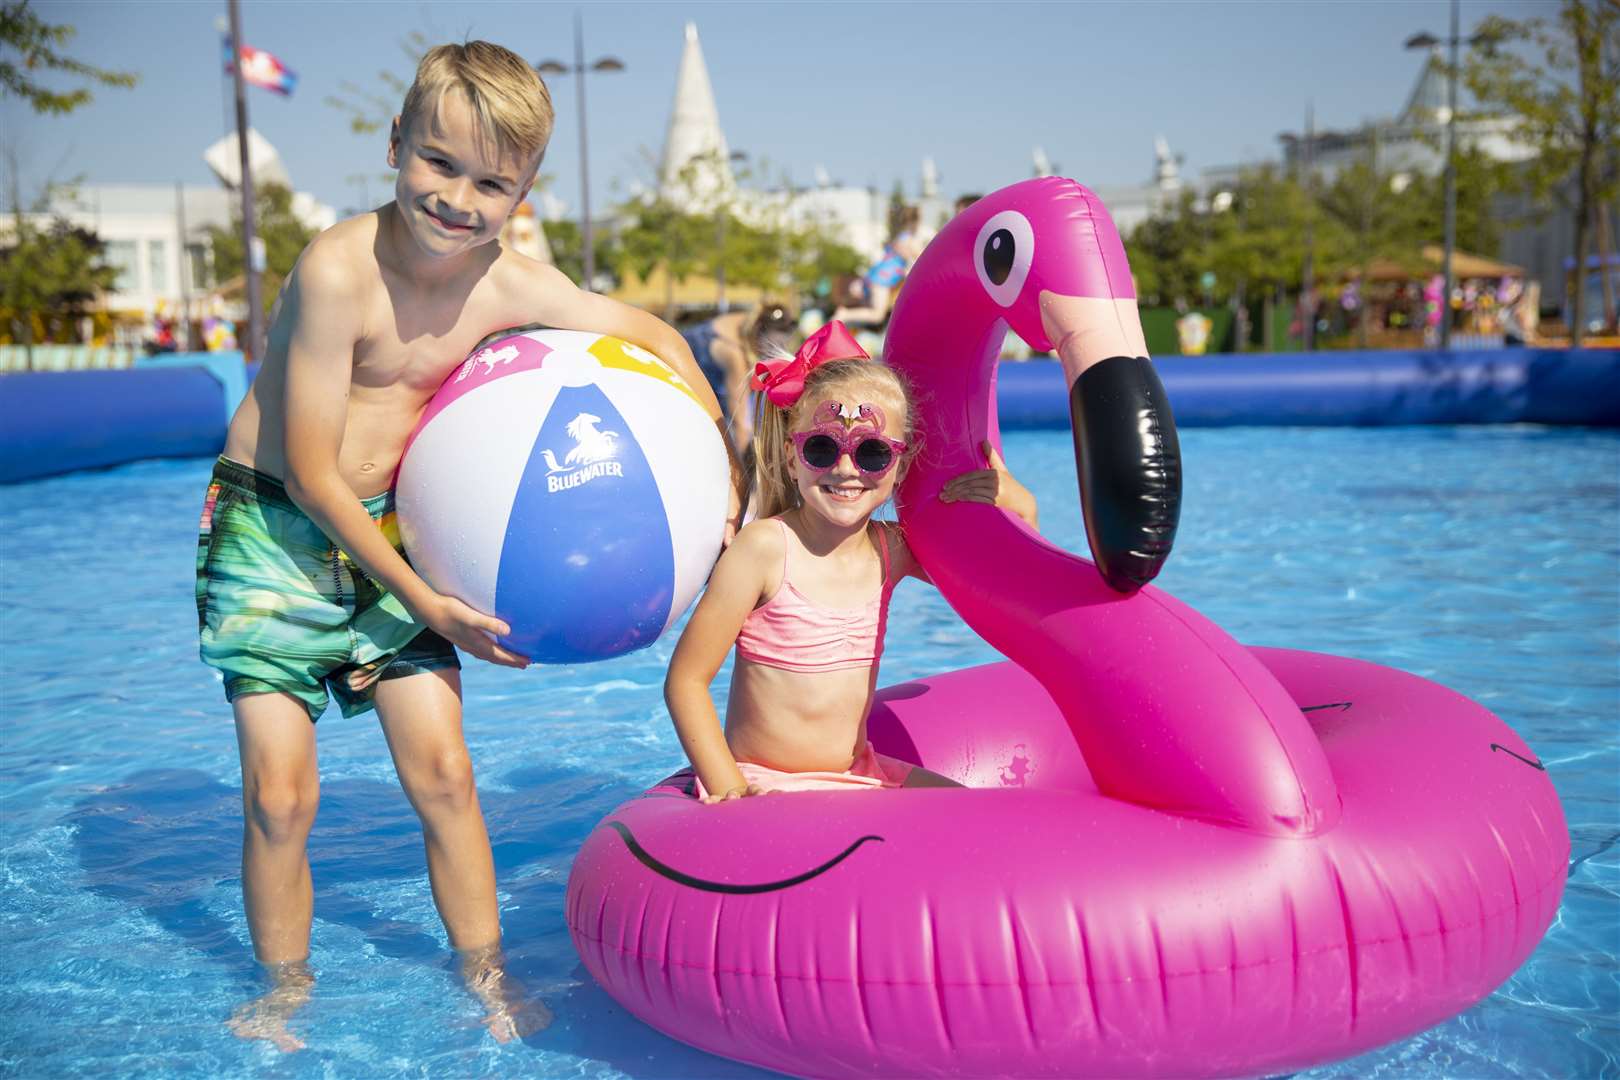 The Beach at Bluewater is open July 20 until September 8